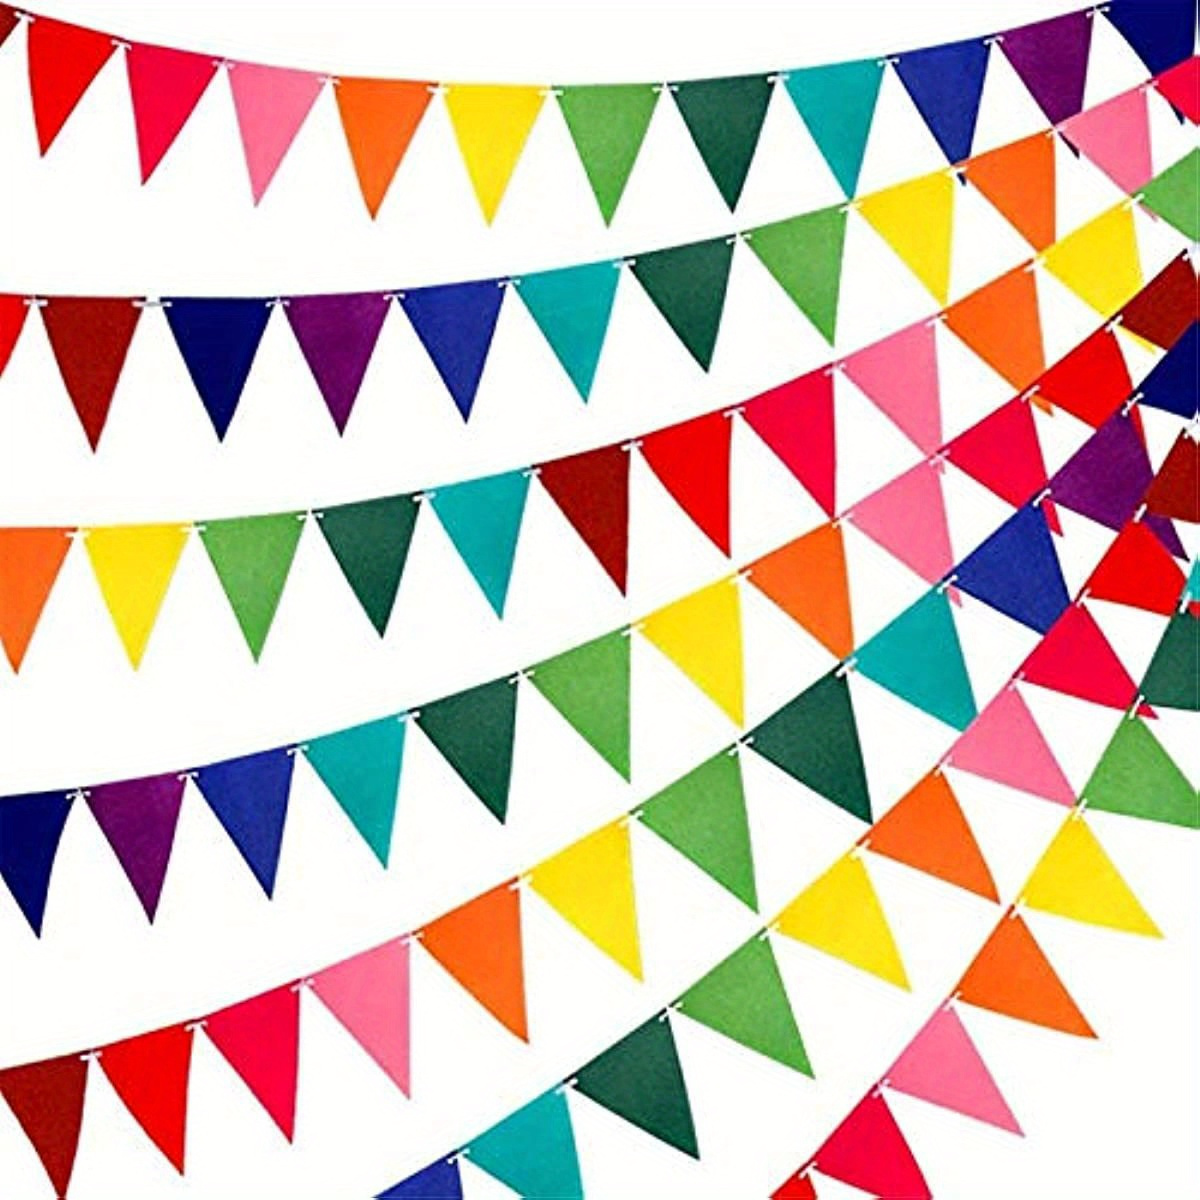 

12pcs Rainbow Felt Fabric Pennant Banner Flags, Colorful Reusable Bunting For Carnival & Birthday Party Decor, Triangle Flags For Festive Outdoor & Indoor Events